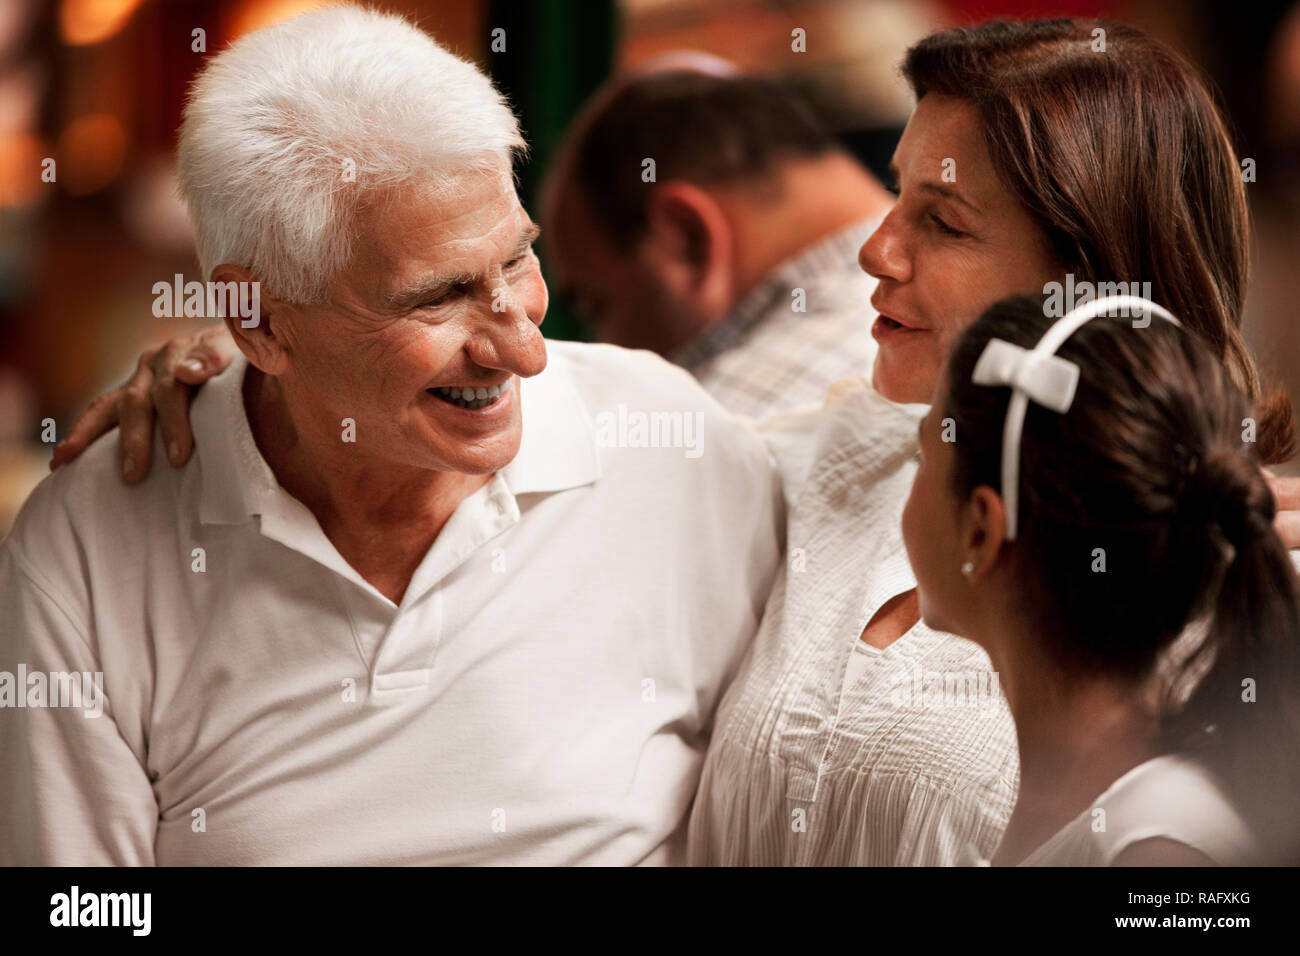 Close-up of a happy family looking at one another. Stock Photo